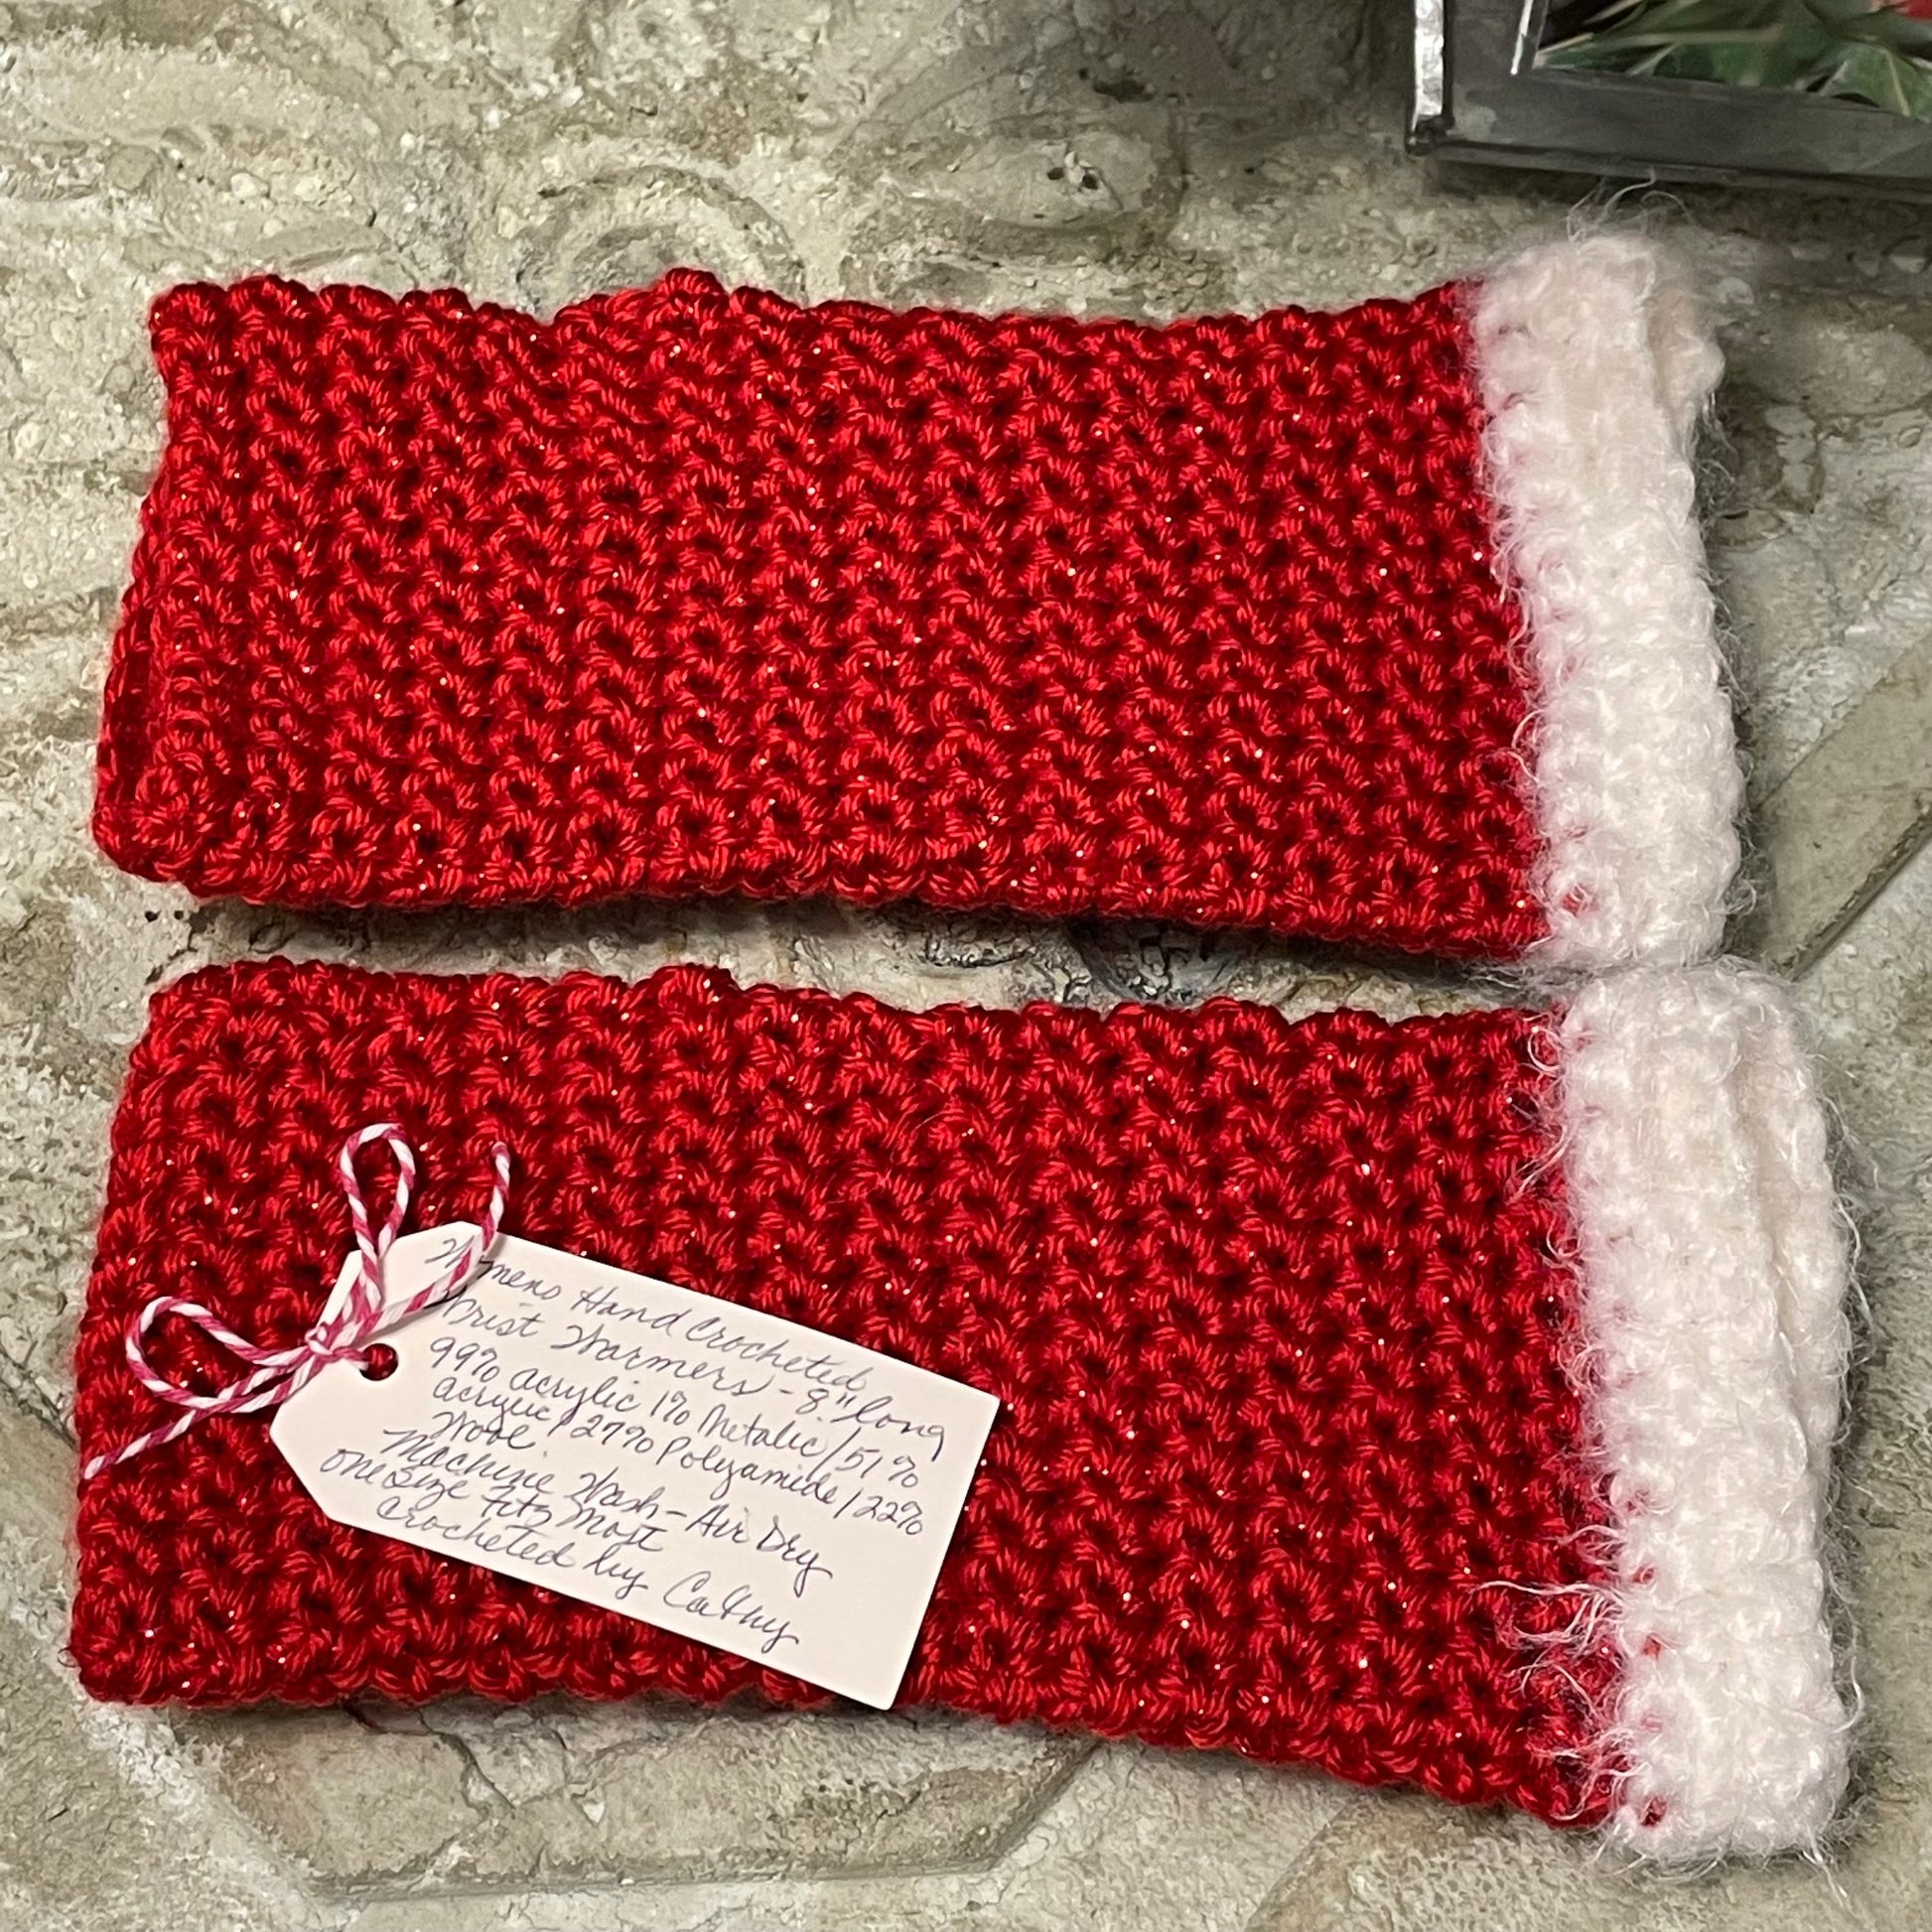 Extra Soft Red Glitter & White Trim Gaming Texting Writing Tech Fingerless Gloves Wrist Warmers Holiday Christmas Winter--flat view against pale stone backdrop